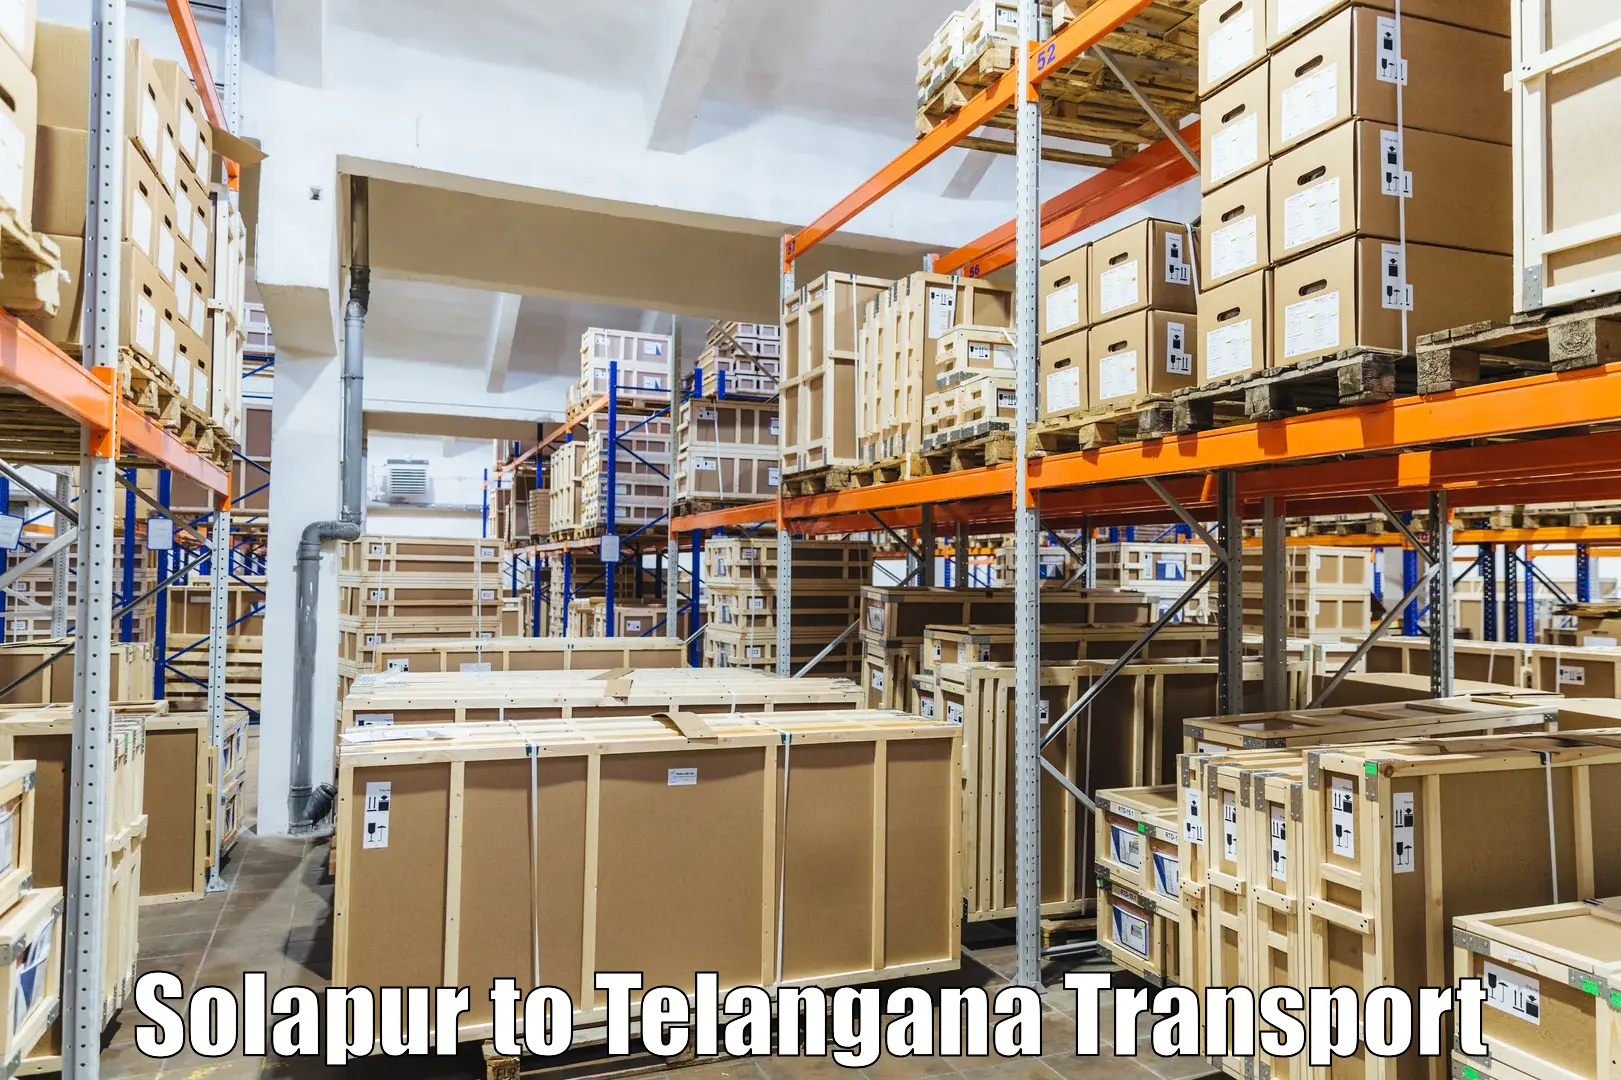 Commercial transport service Solapur to Warangal